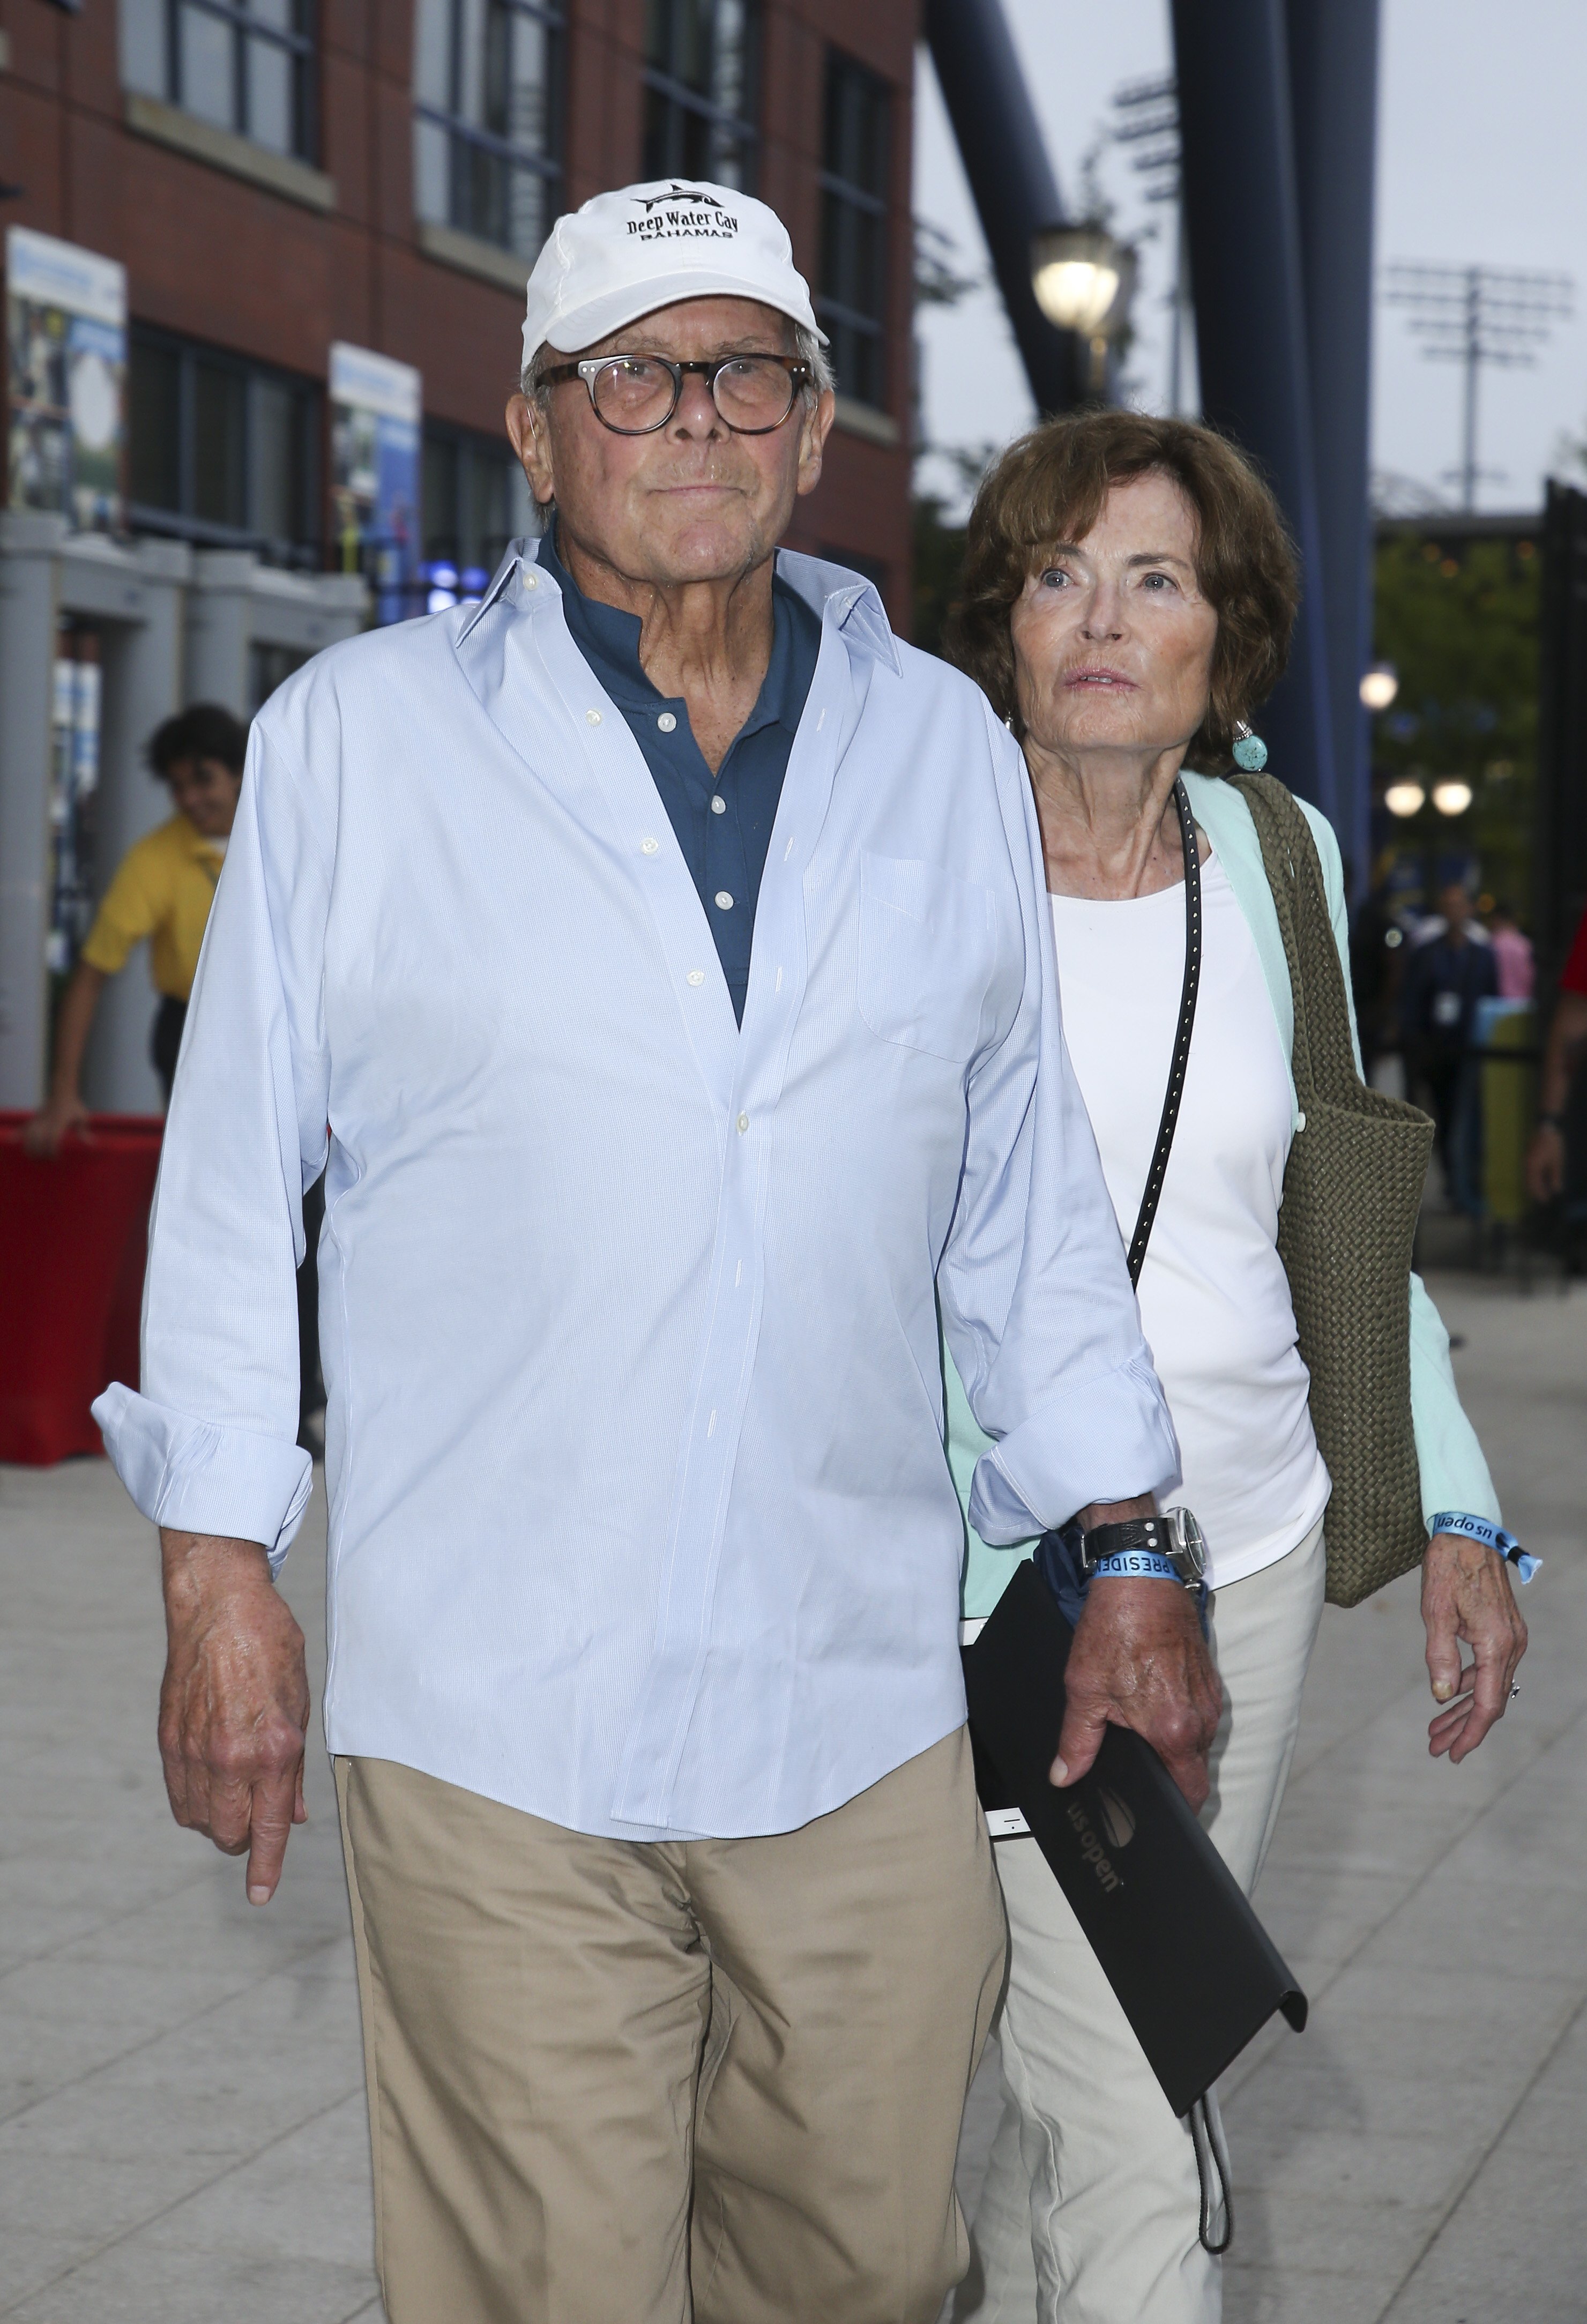 Tom Brokaw and his wife Meredith Lynn Auld attend the Men's Semi-Finals on Day 12 of the 2018 US Open Tennis on Arthur Ashe Stadium at the USTA Billie Jean King National Tennis Center on September 7, 2018 in Flushing Meadows, Queens, New York City |  Source: Getty Images